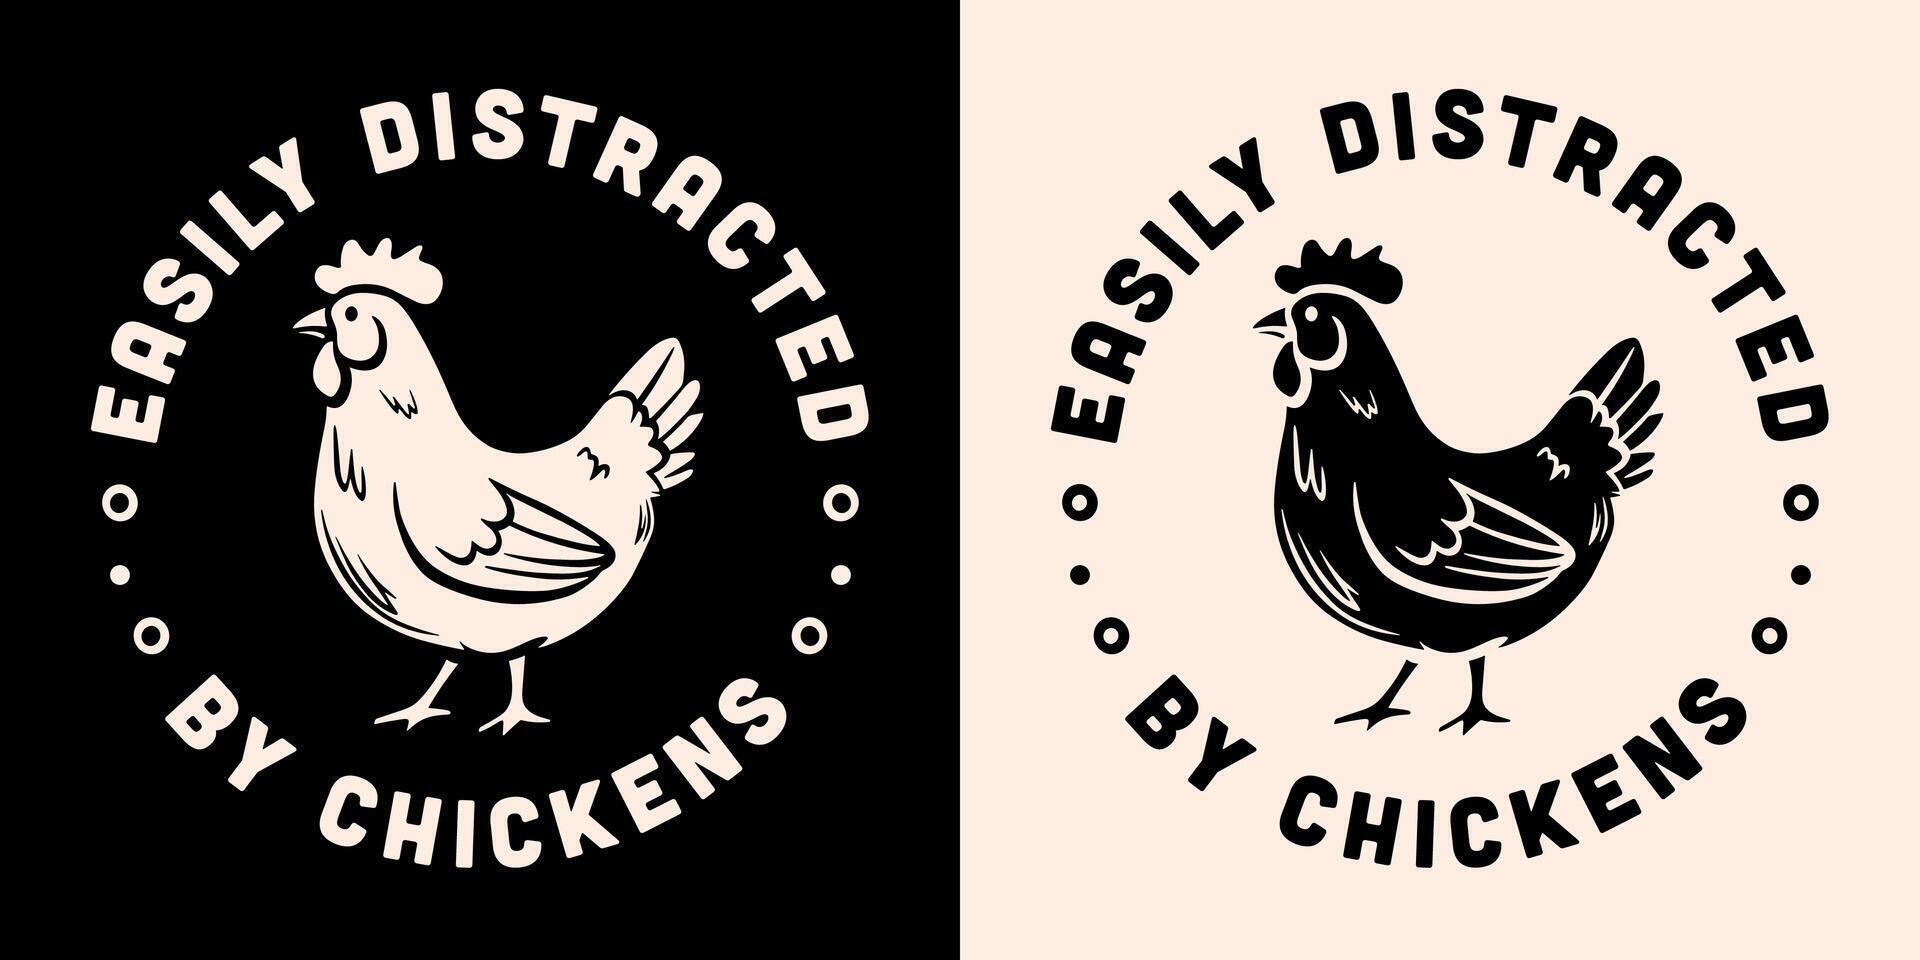 Chicken lover club quotes round badge sticker easily distracted by chickens poultry farmer farm girl life aesthetic funny humor printable gifts shirt design cut file vector